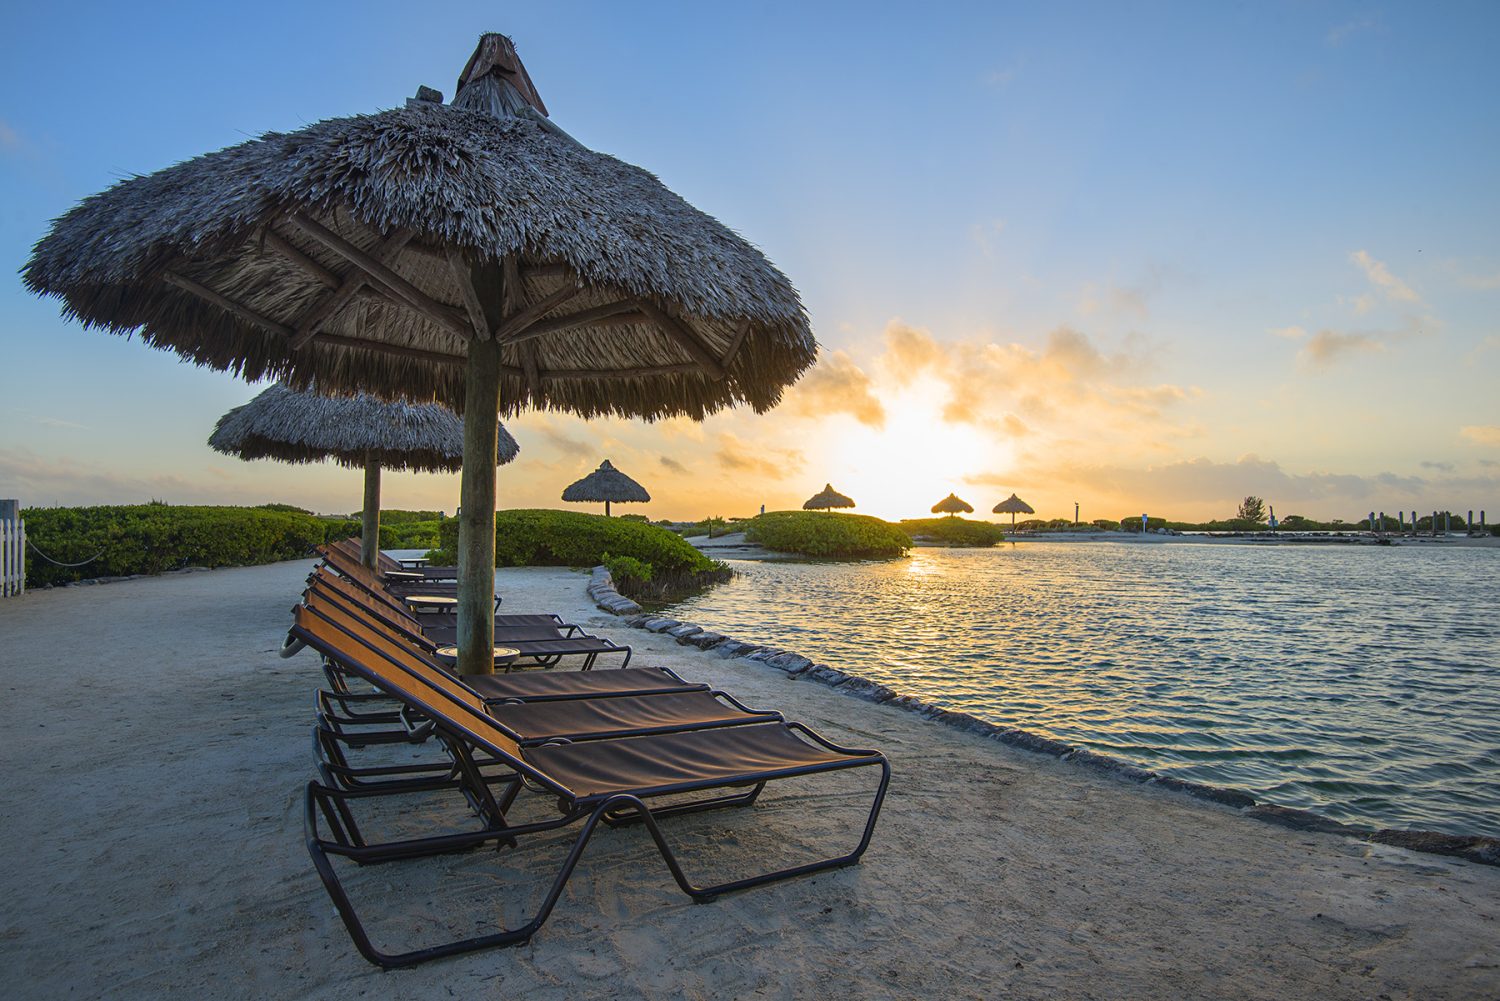 Umbrella and lounge chairs lined up along a lagoon waterfront at sunset.